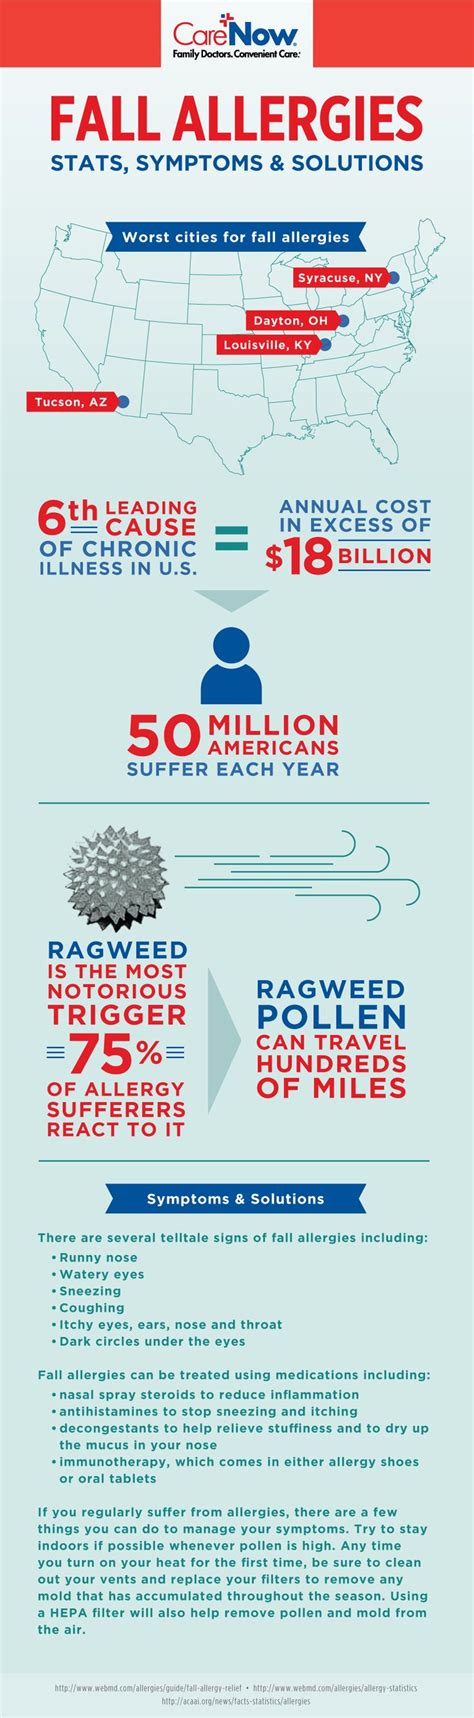 Seasonal Allergy State Symptoms And Solutions Infographic Carenow